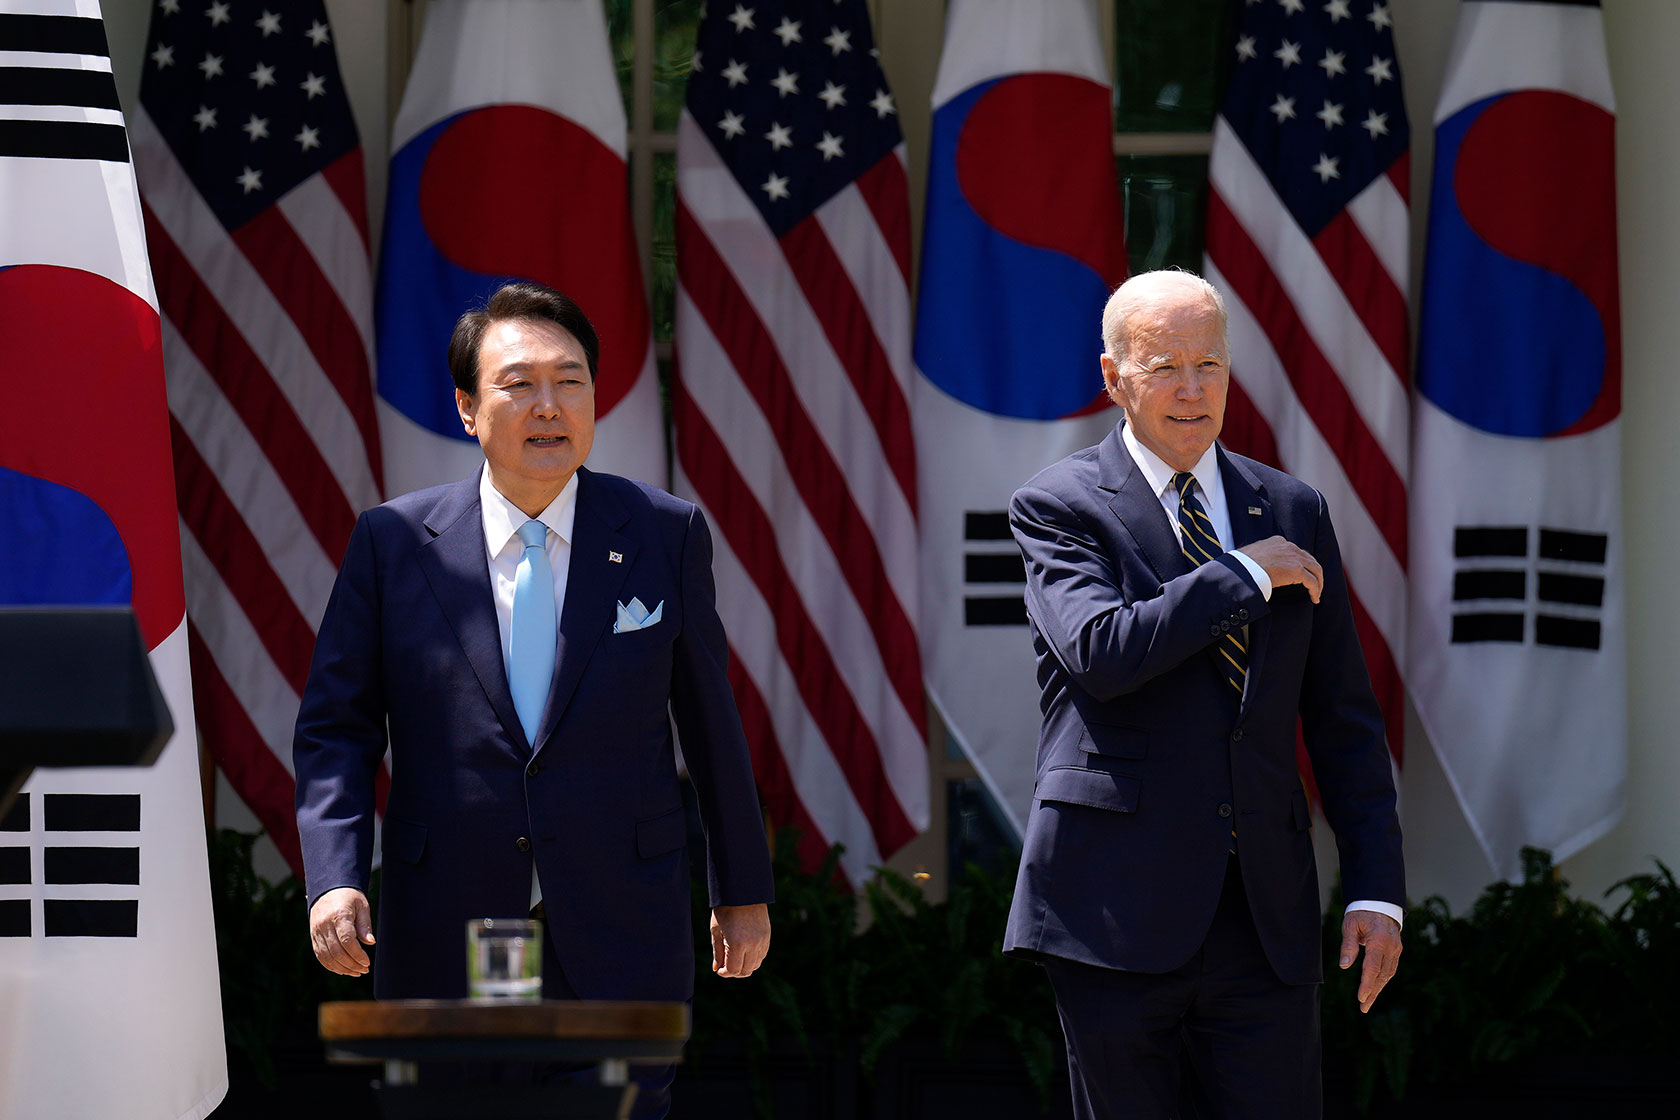 Presidents Yoon and Biden in front of U.S. and South Korean flags